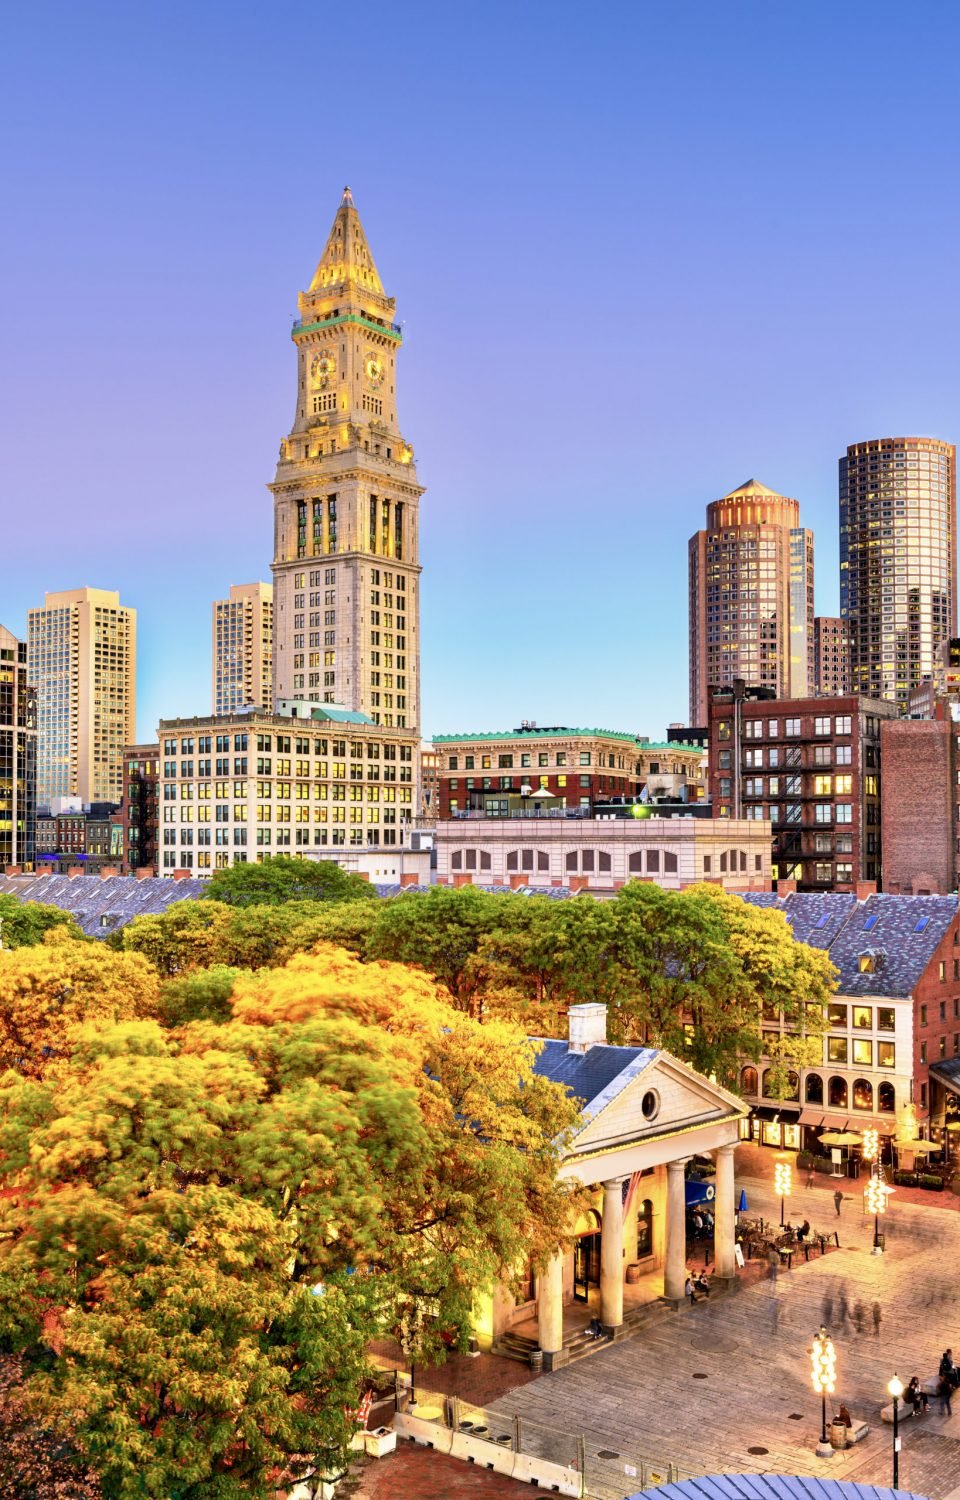 Boston, Massachusetts, USA skyline with Faneuil Hall and Quincy Market at dusk.